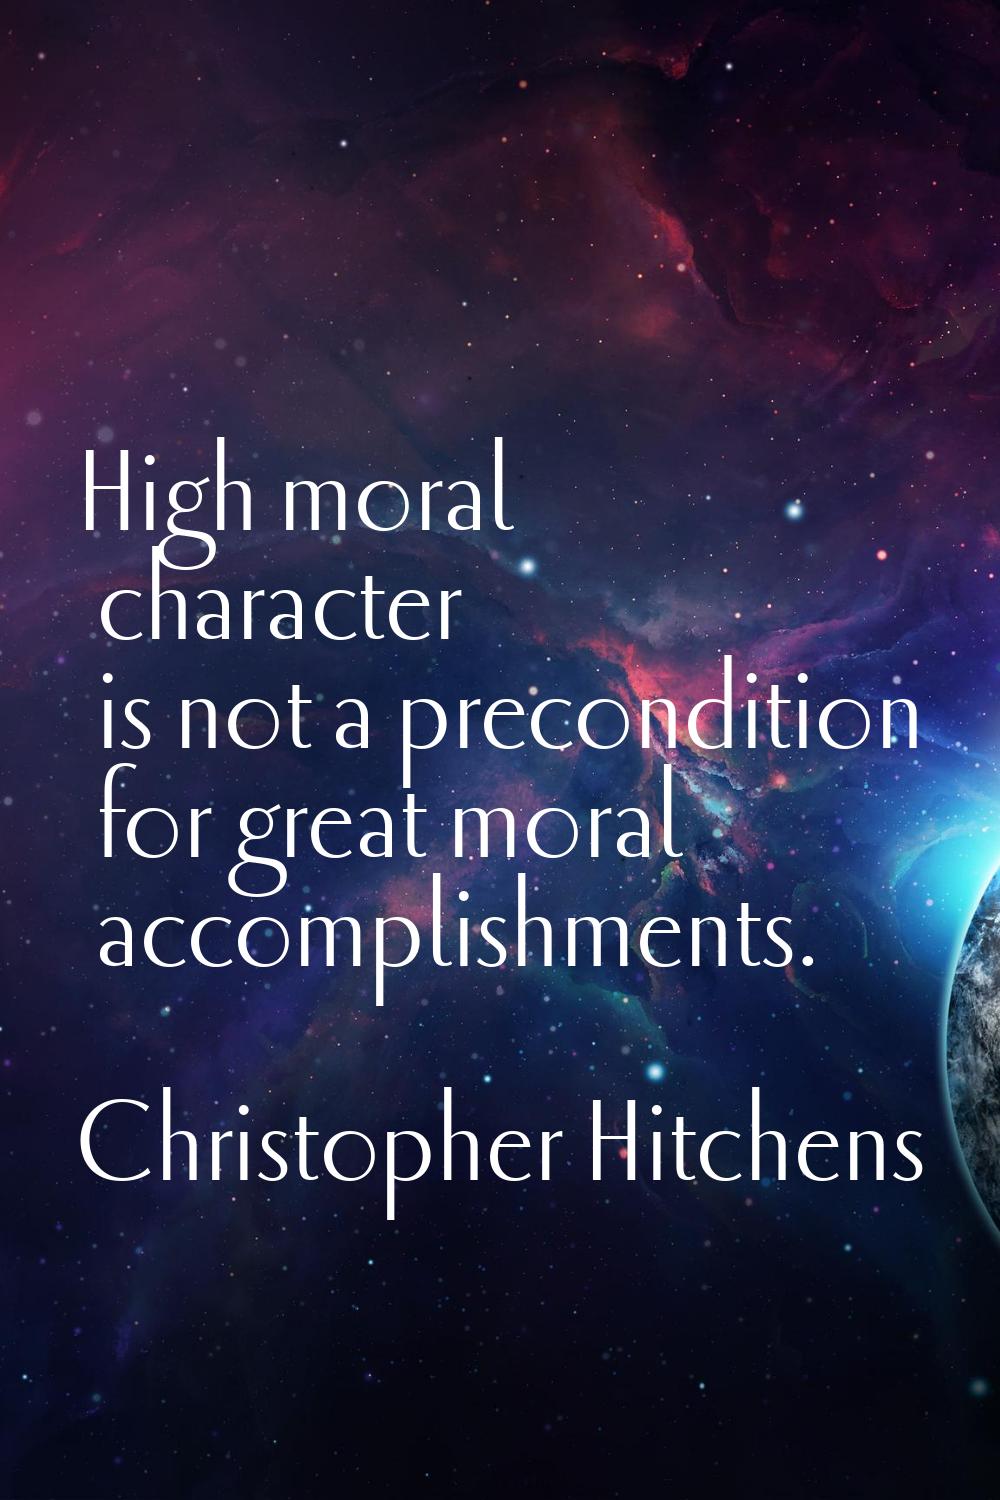 High moral character is not a precondition for great moral accomplishments.